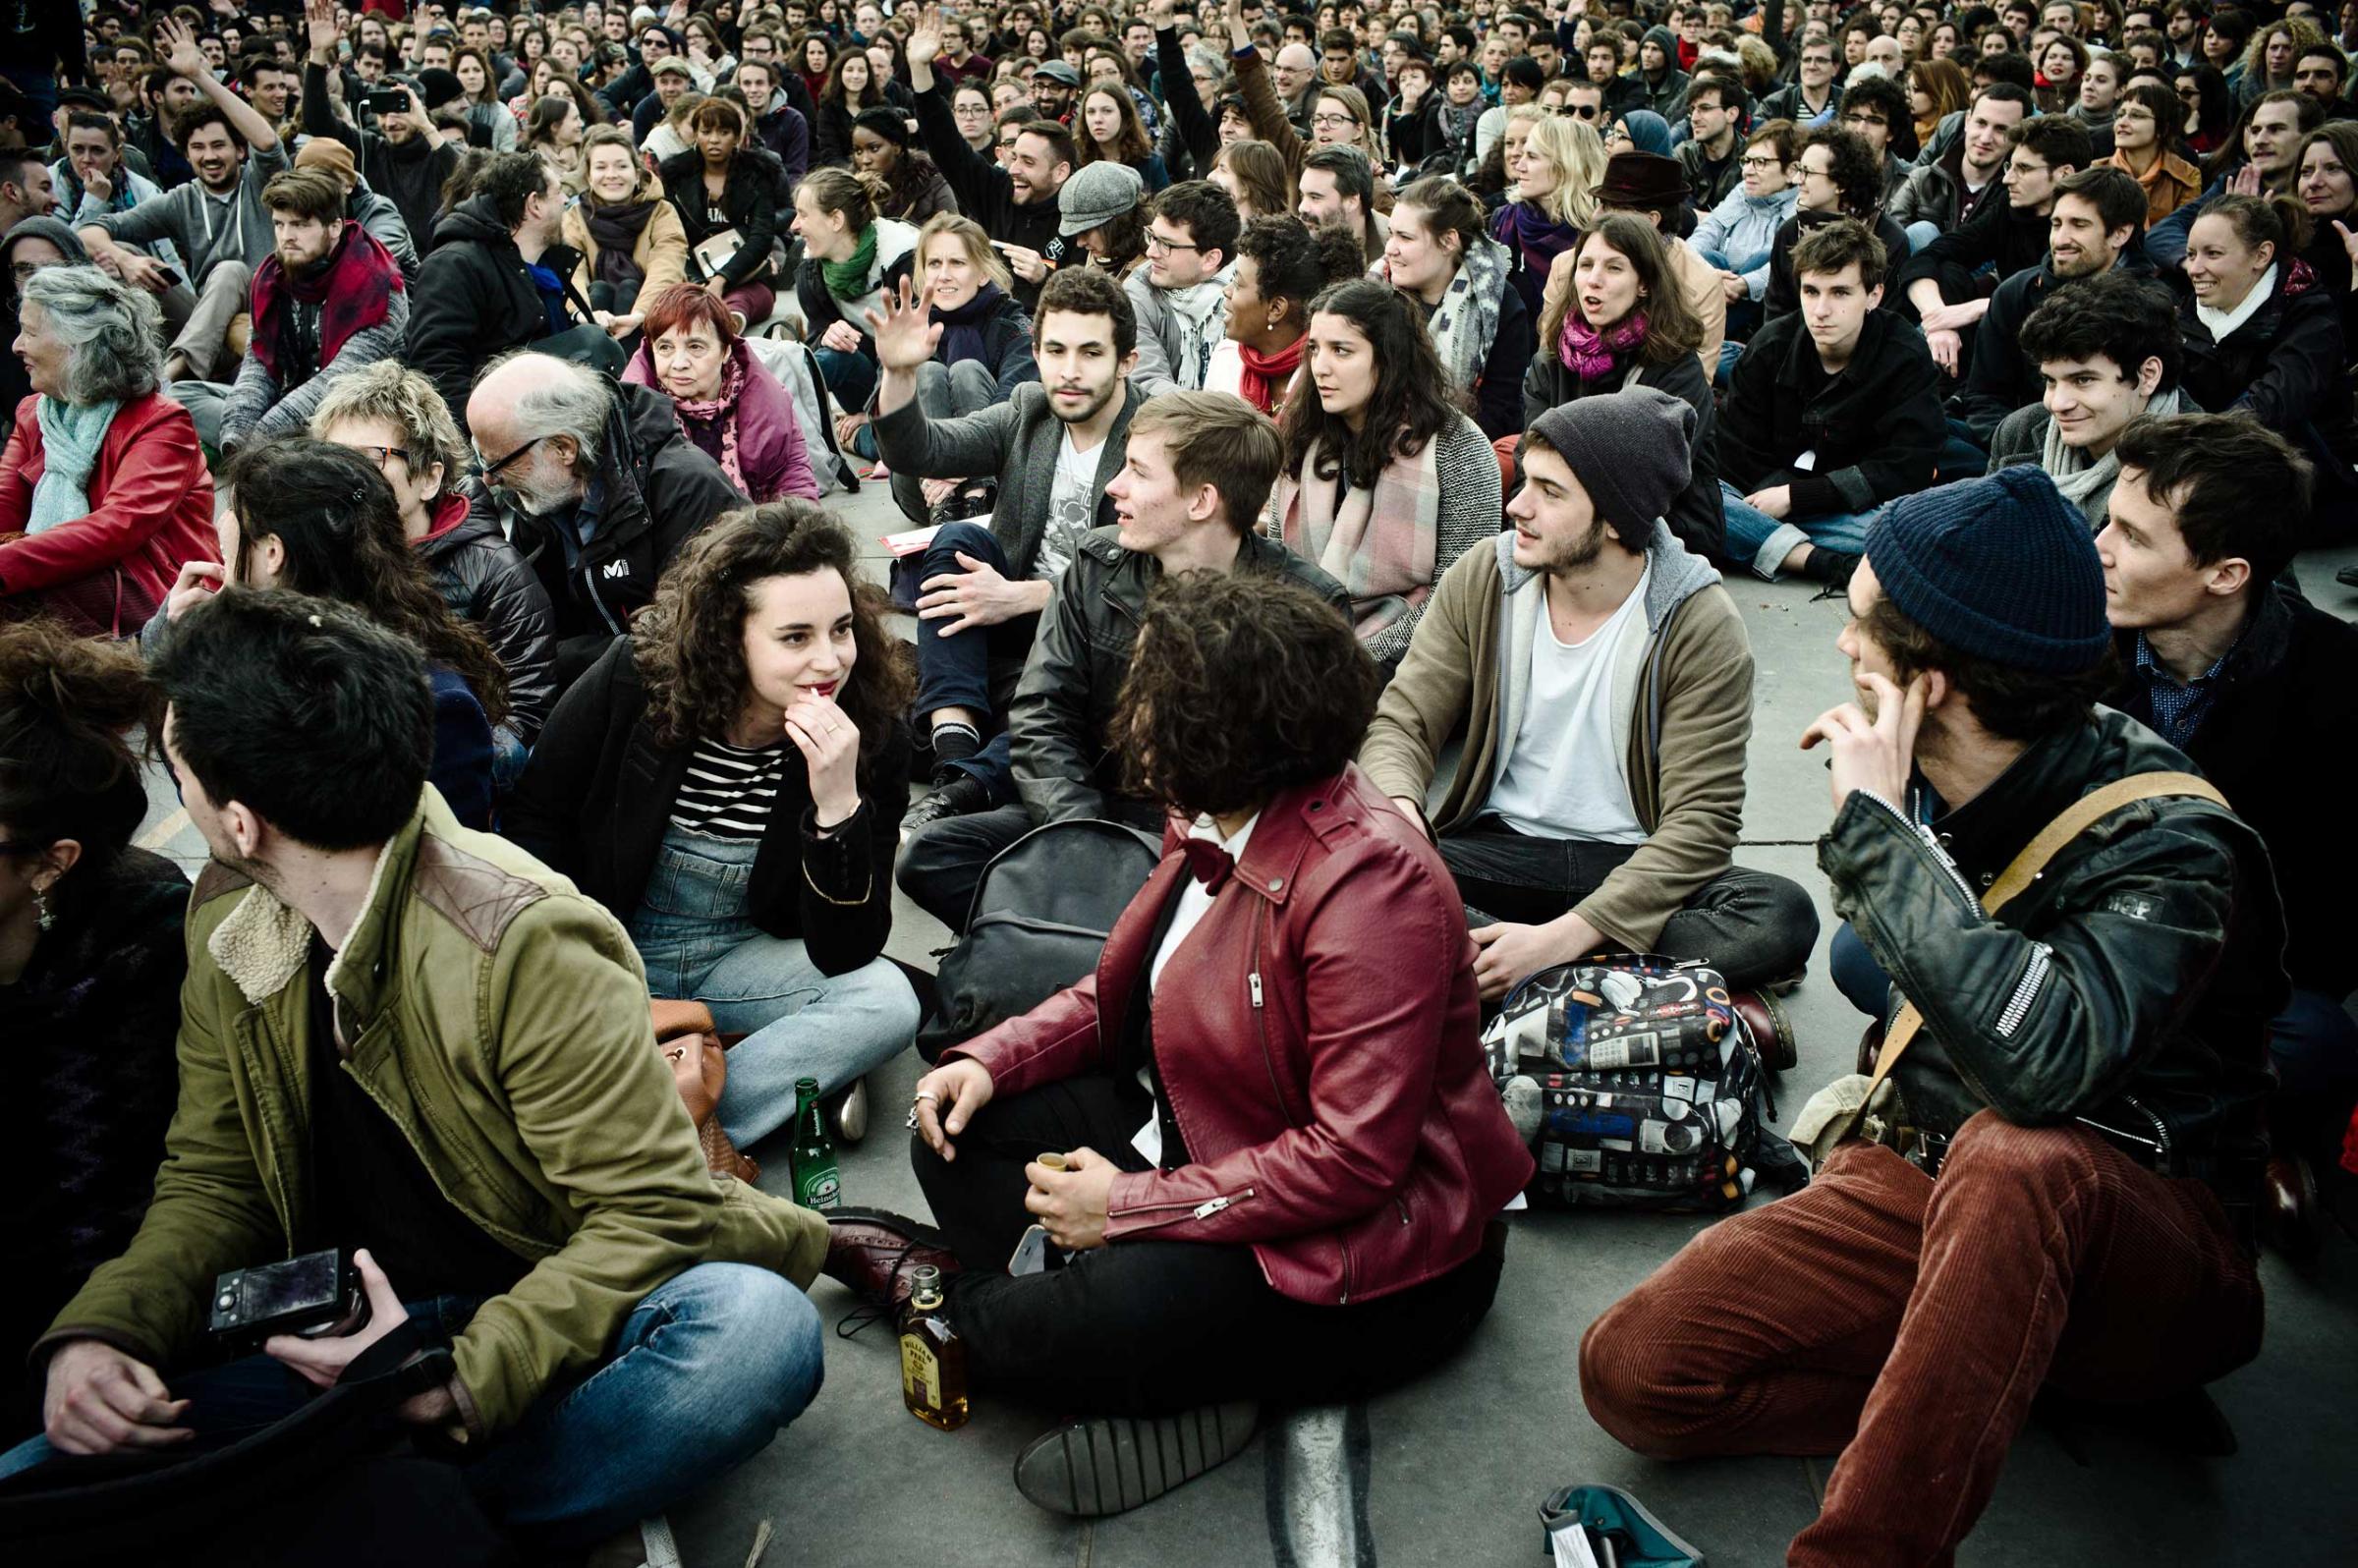 At the Nuit Debout, the General Assembly (from 6:00 pm to 11:00 pm) validate the decisions of the various committees.